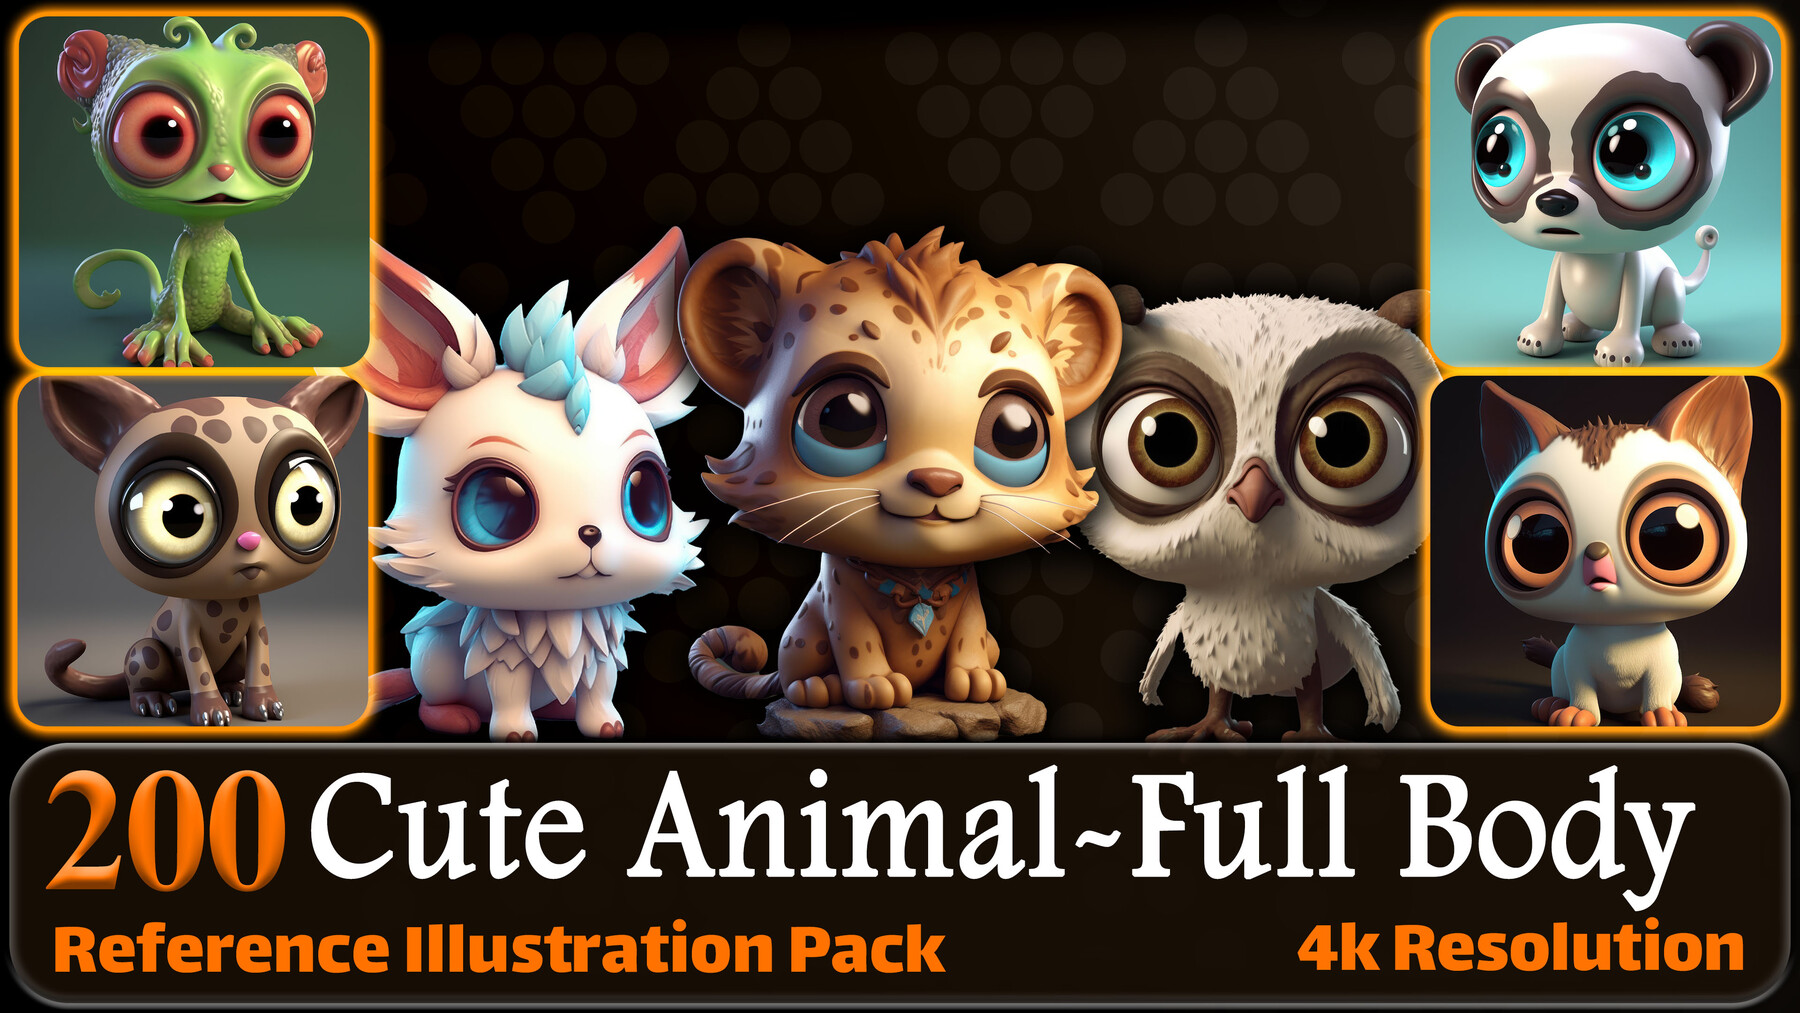 ArtStation - 200 Cute Animal Character (Full Body) Reference Pack ...